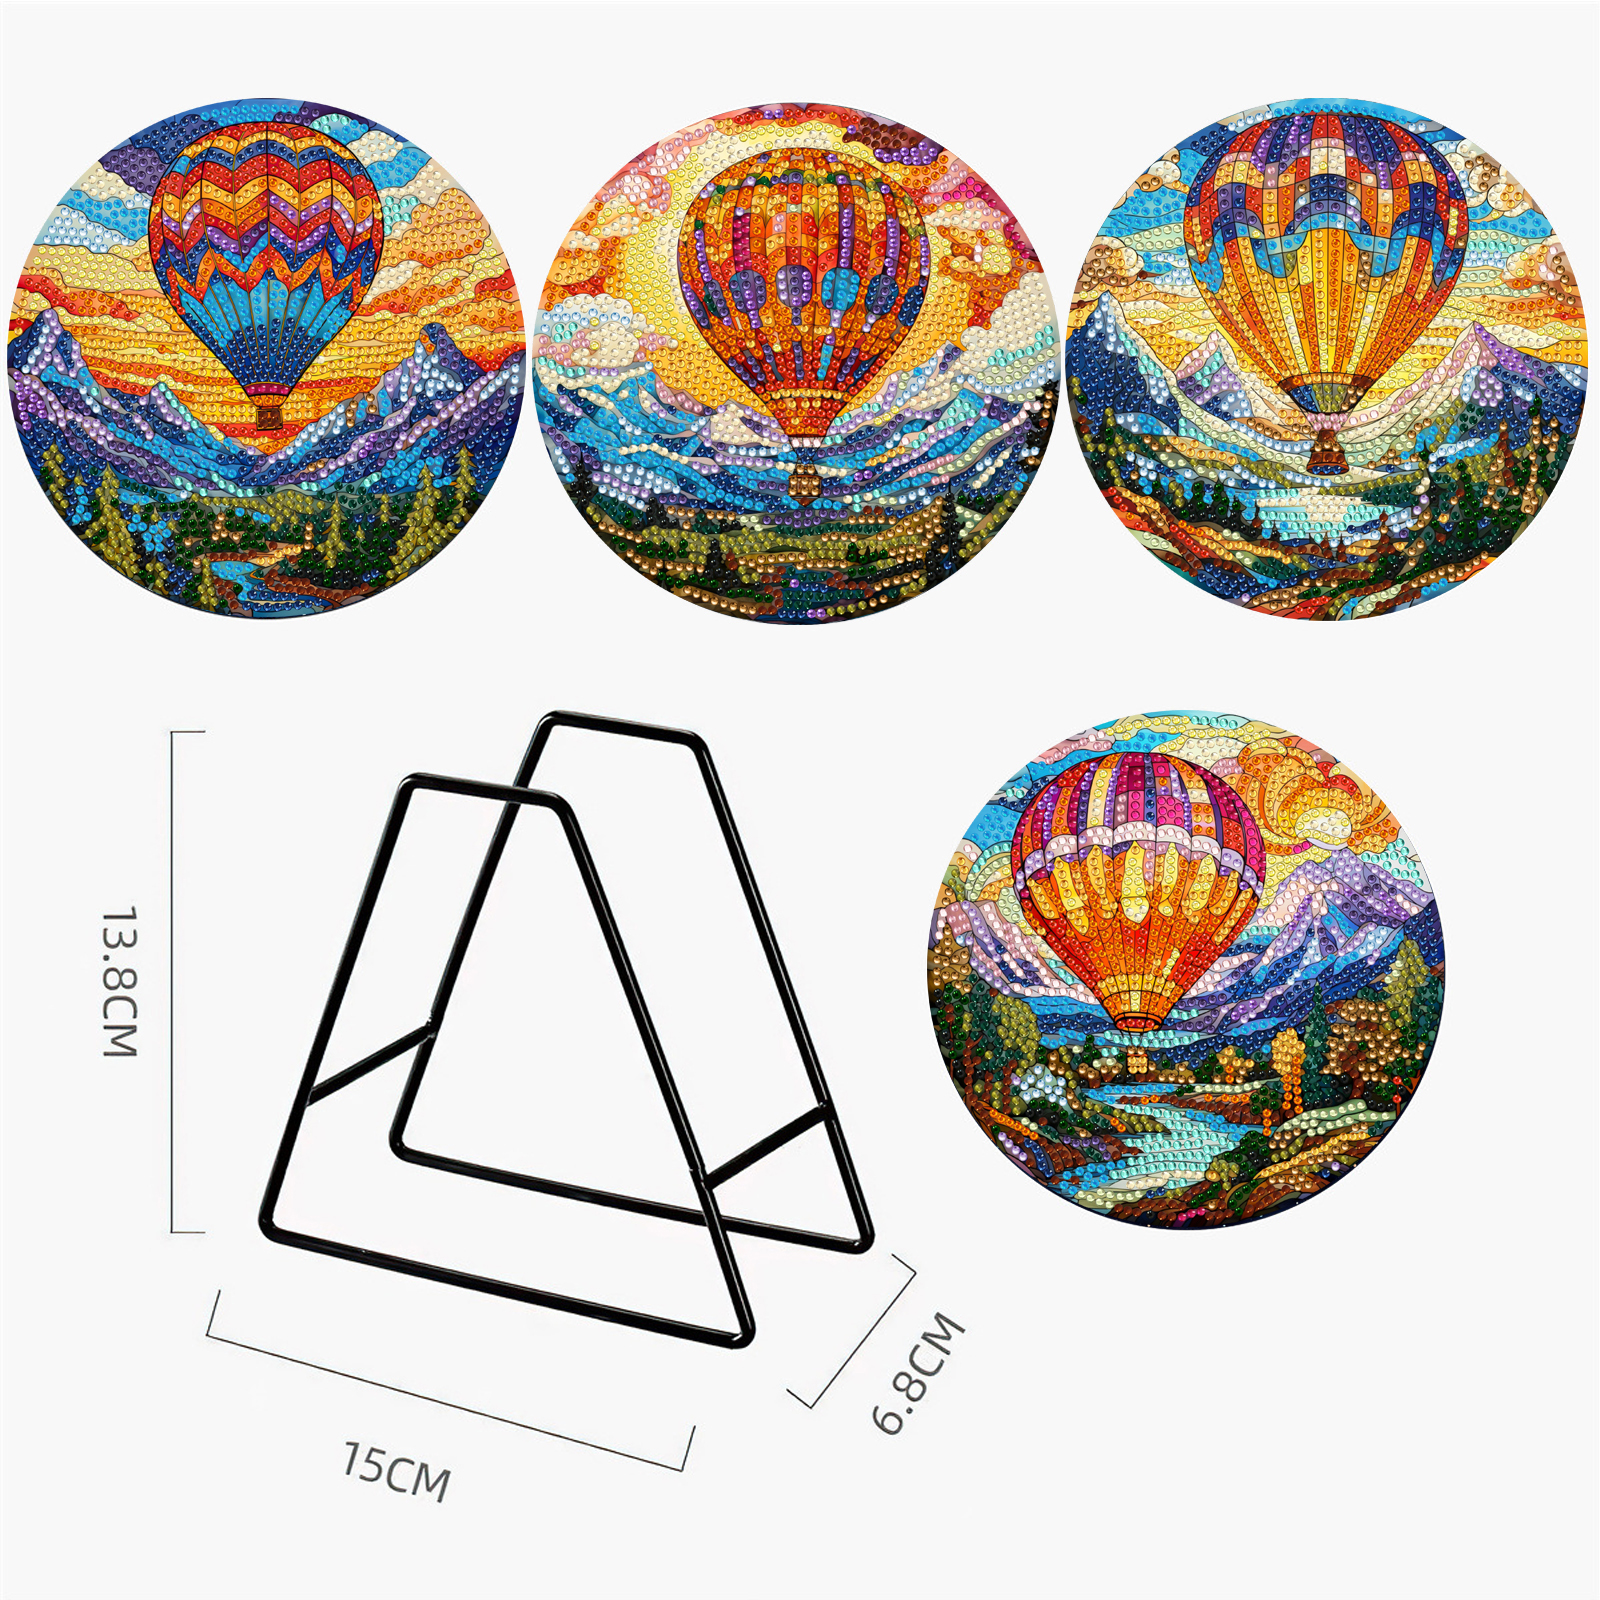 (BD489) (Acrylic) 4pcs DIY Diamond Painted Placemats, Insulated Dish Mats, Comes with Mat Storage Rack, Hot Air Balloon and Mountain